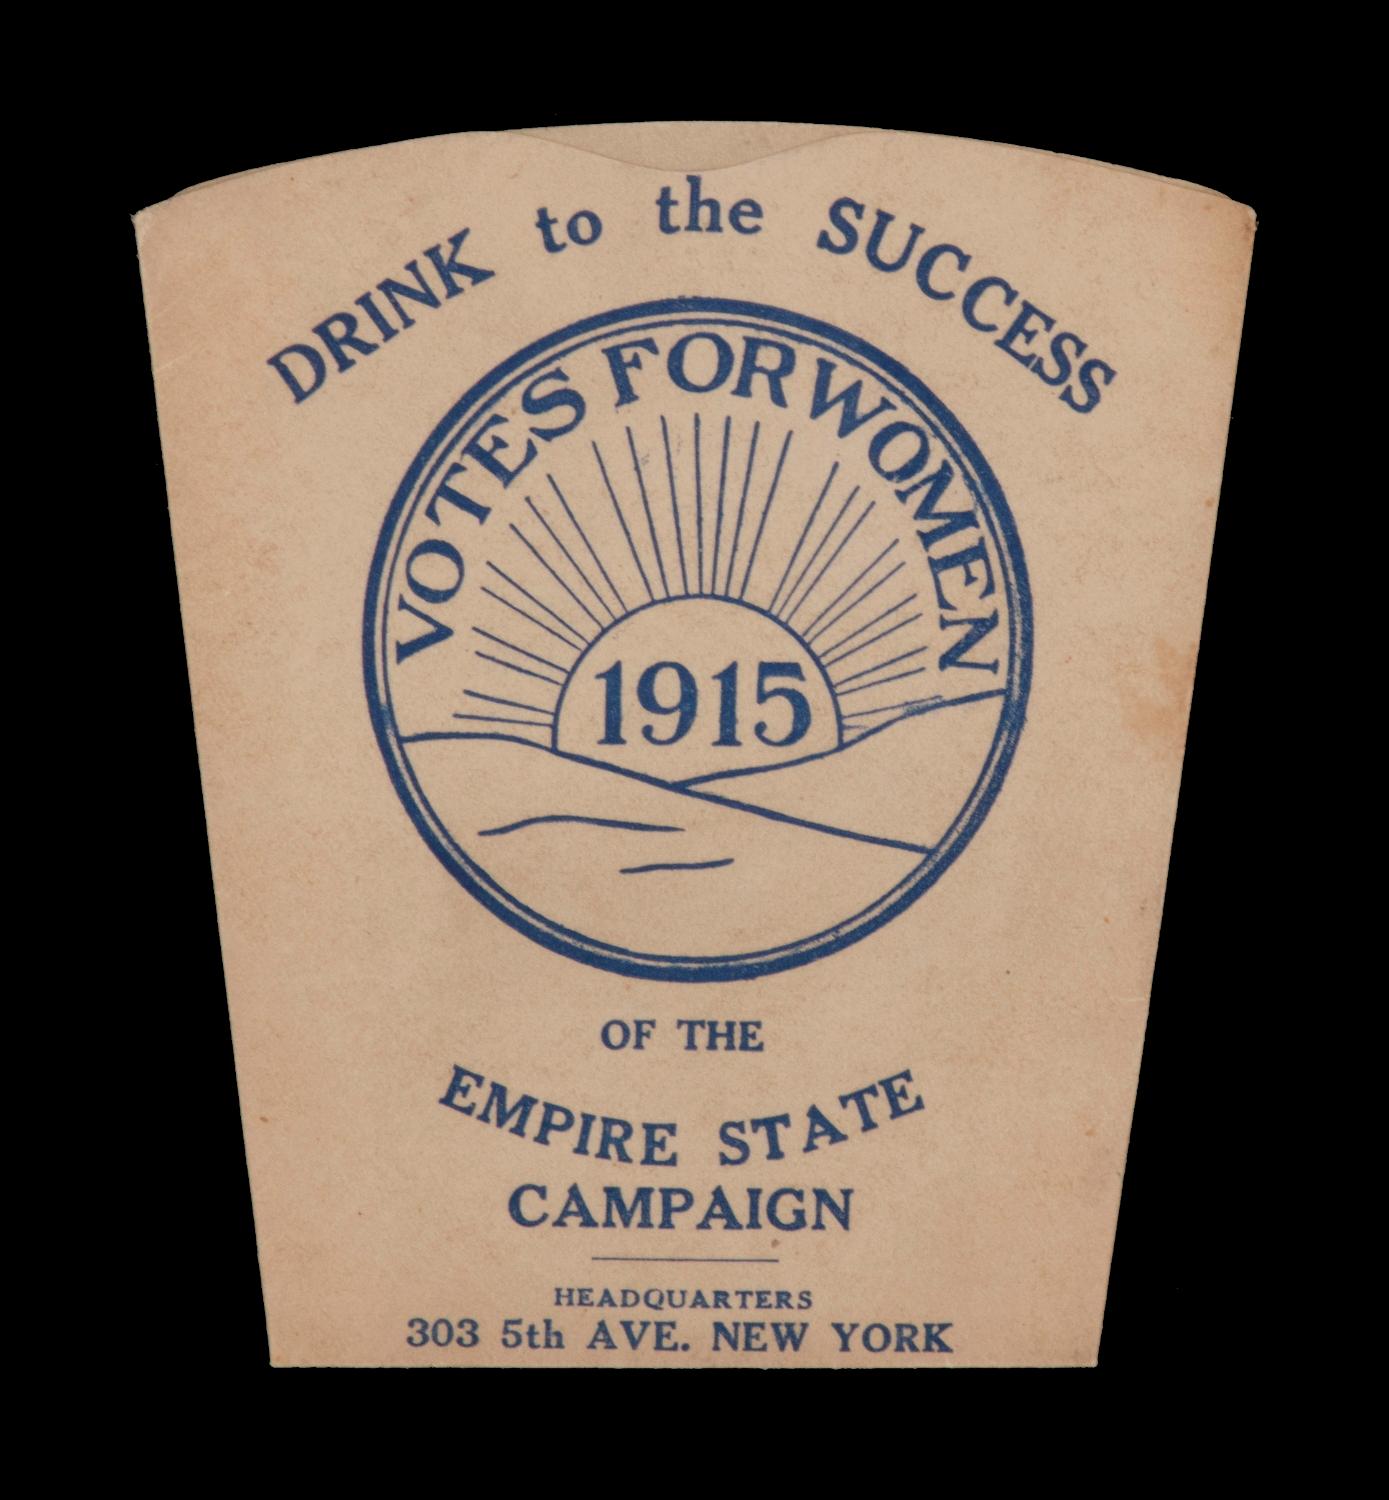 RARE COLLAPSIBLE DRINKING CUP, MADE FOR THE EMPIRE STATE (NEW YORK) CAMPAIGN COMMITTEE FOR WOMEN’S SUFFRAGE, ORGANIZED BY CARRIE CHAPMAN CATT, 1915:

Rare, collapsible drinking cup, made for the Empire State Campaign Committee, the organization led